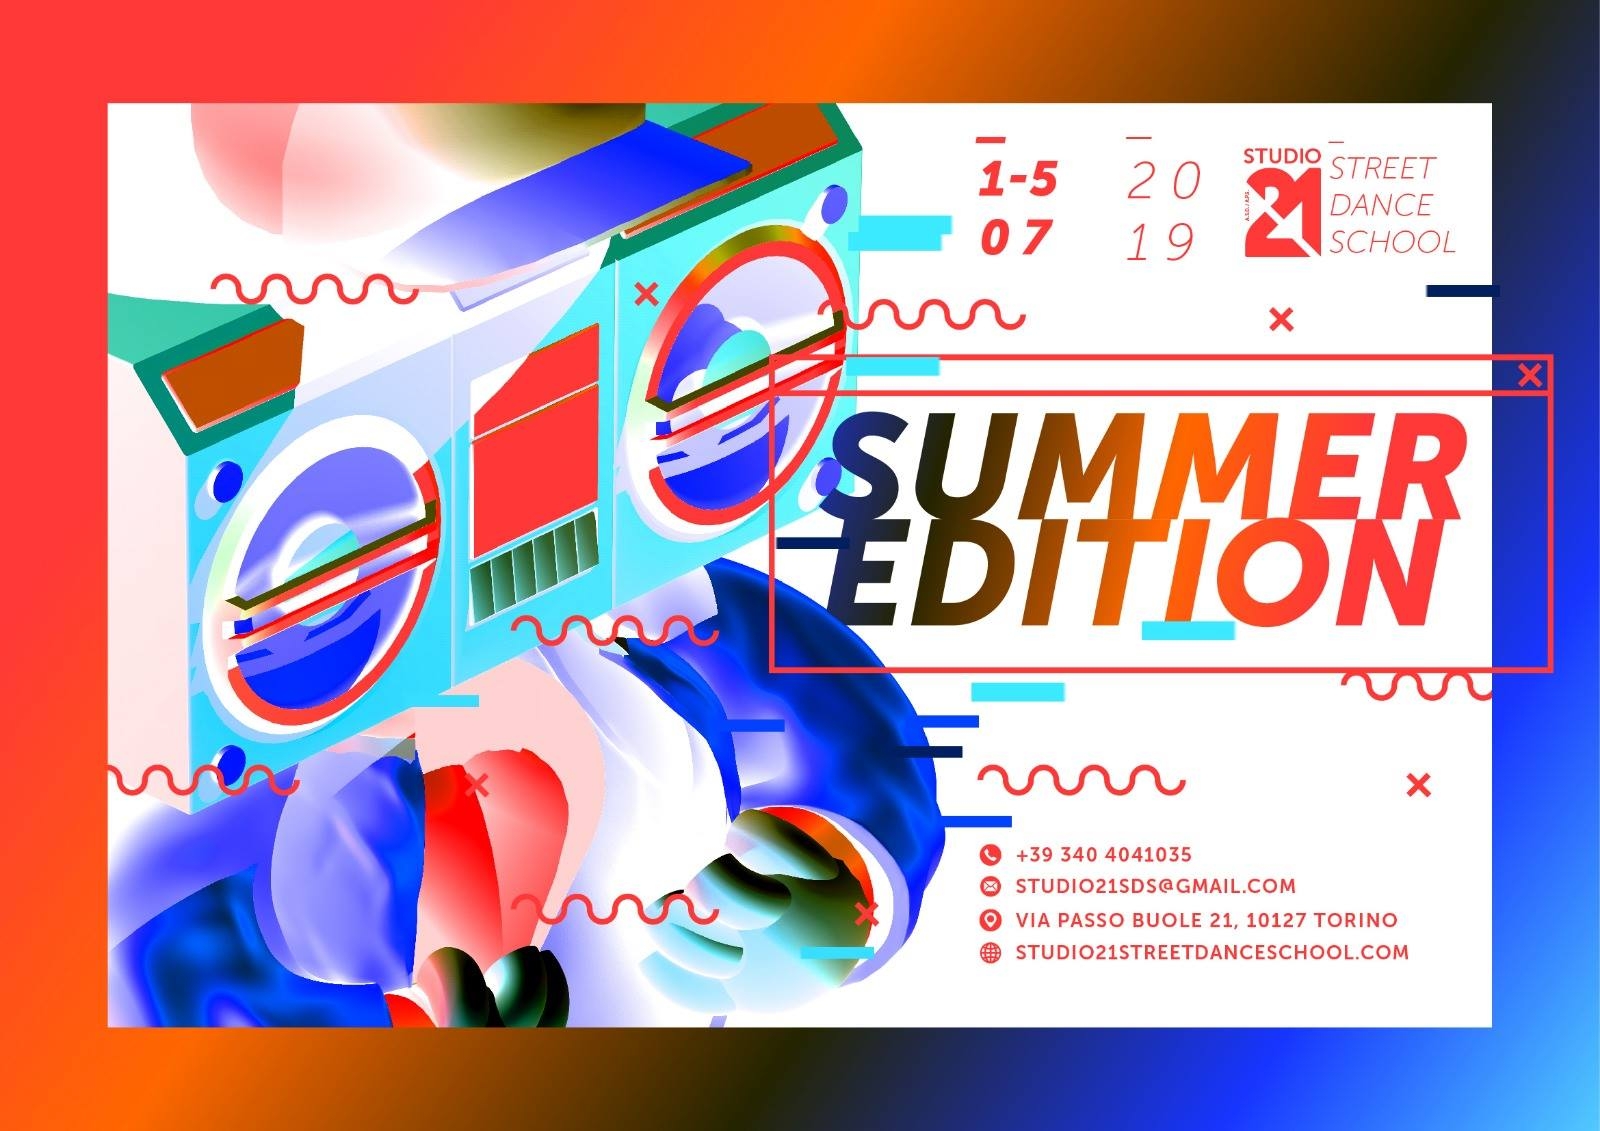 ST21 Summer edition 2019 poster